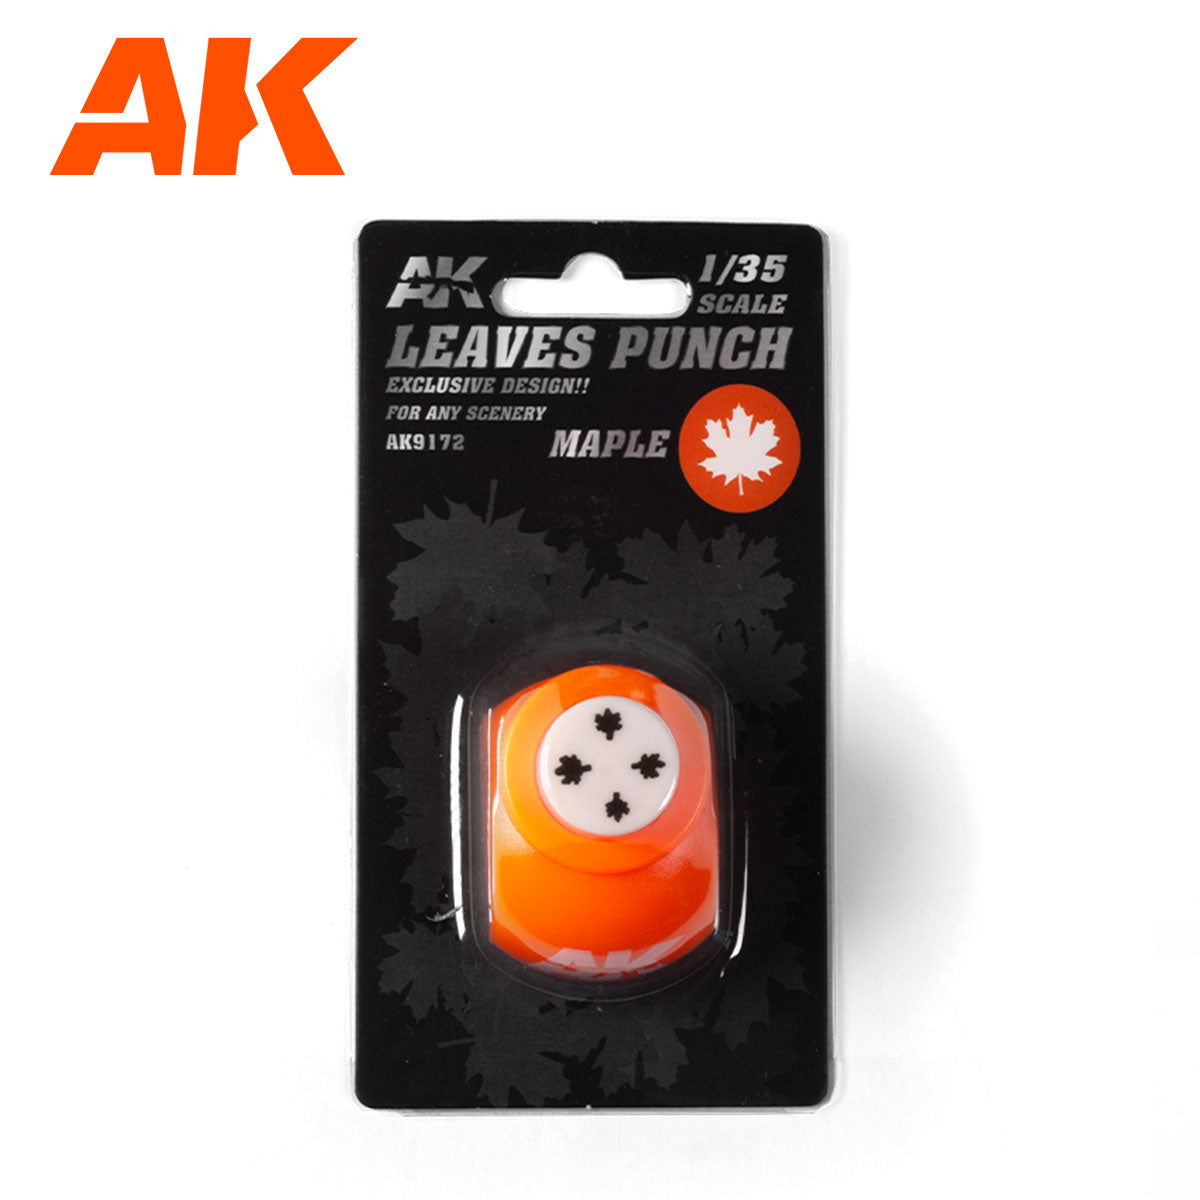 AK9172 - Leaves Punch - Maple (1:35/1:32/54mm)